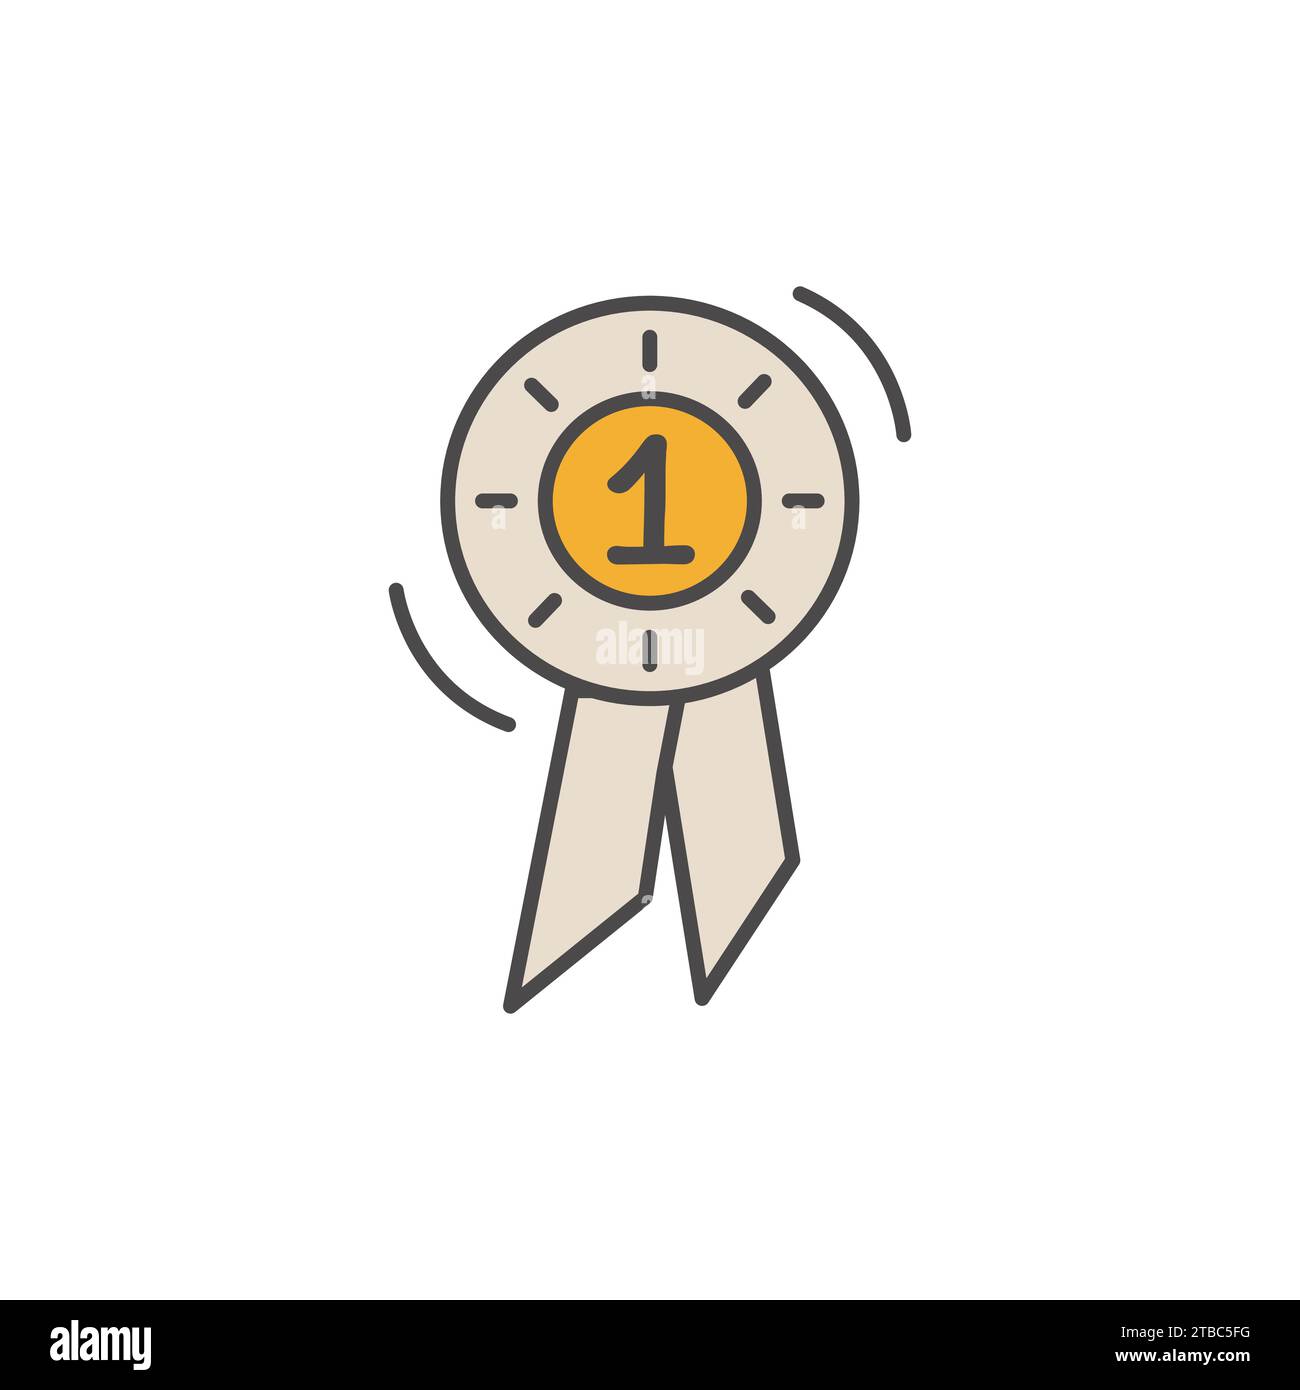 Horse Competition Rosette with Number One. Flat Outline Colored Icon for Champion Horses. Victory and Achievement in Equine Events. Vector Stock Vector